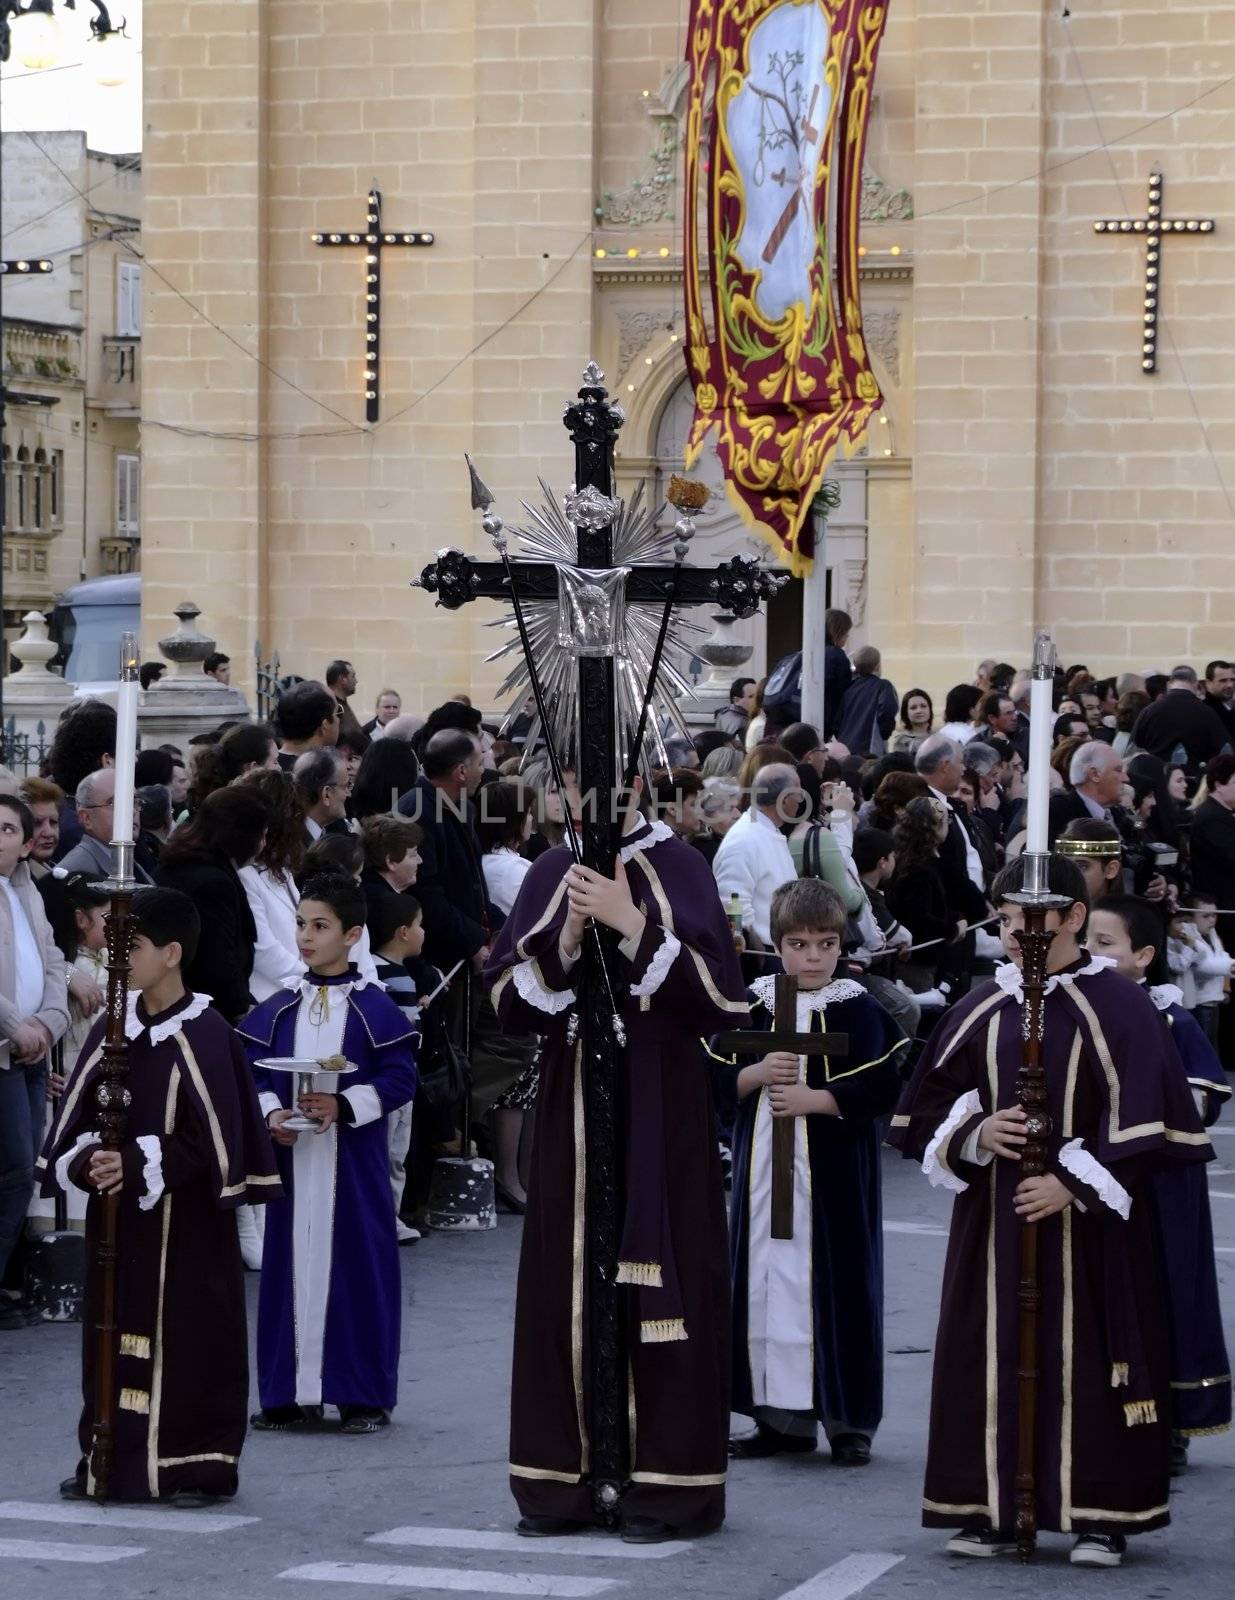 Biblical Series - Good Friday Procession in the town of Luqa in the Mediterranean island of Malta.